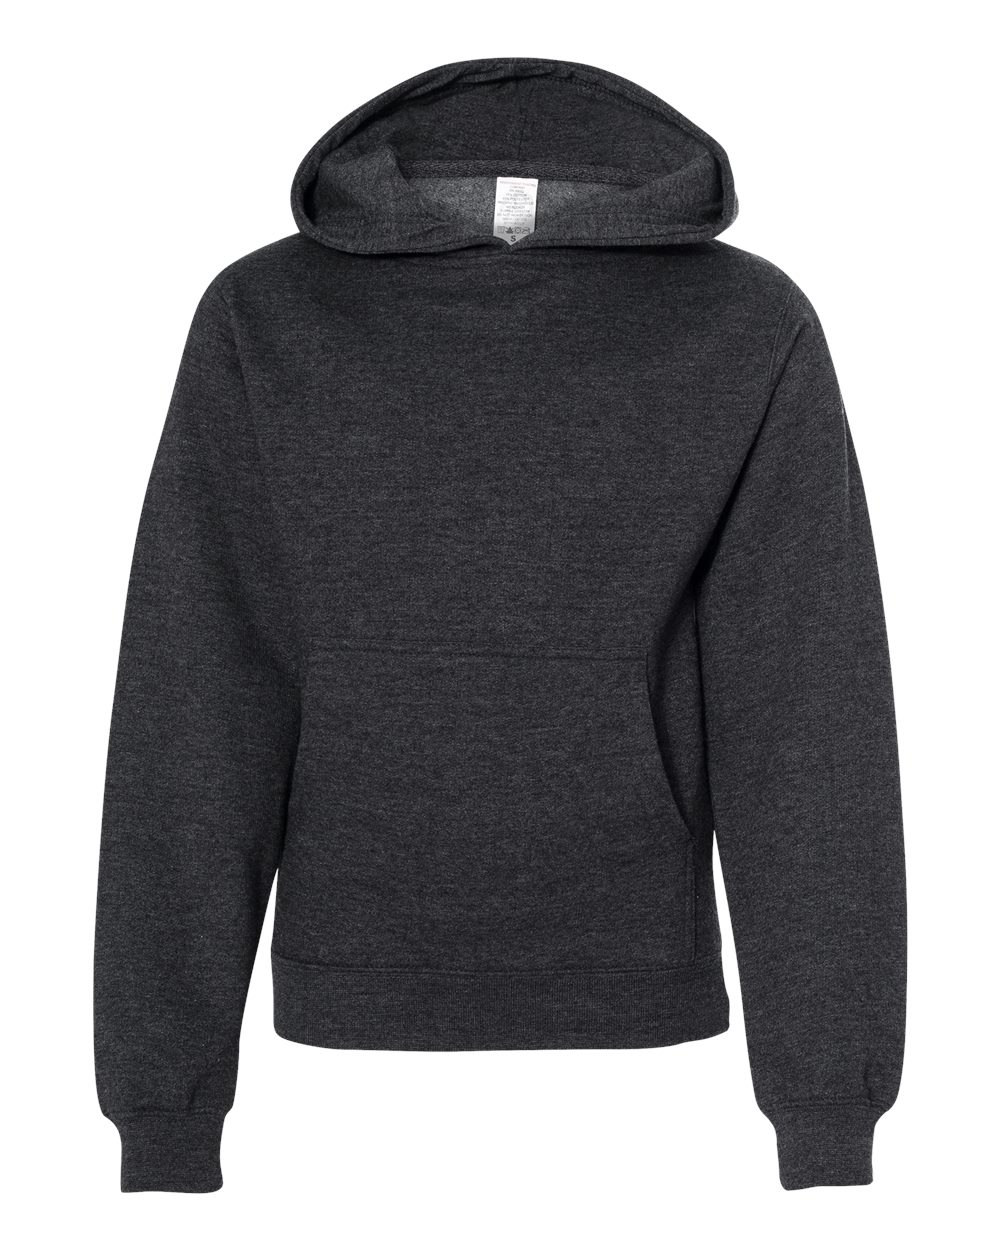 Youth Midweight Hooded Sweatshirt-